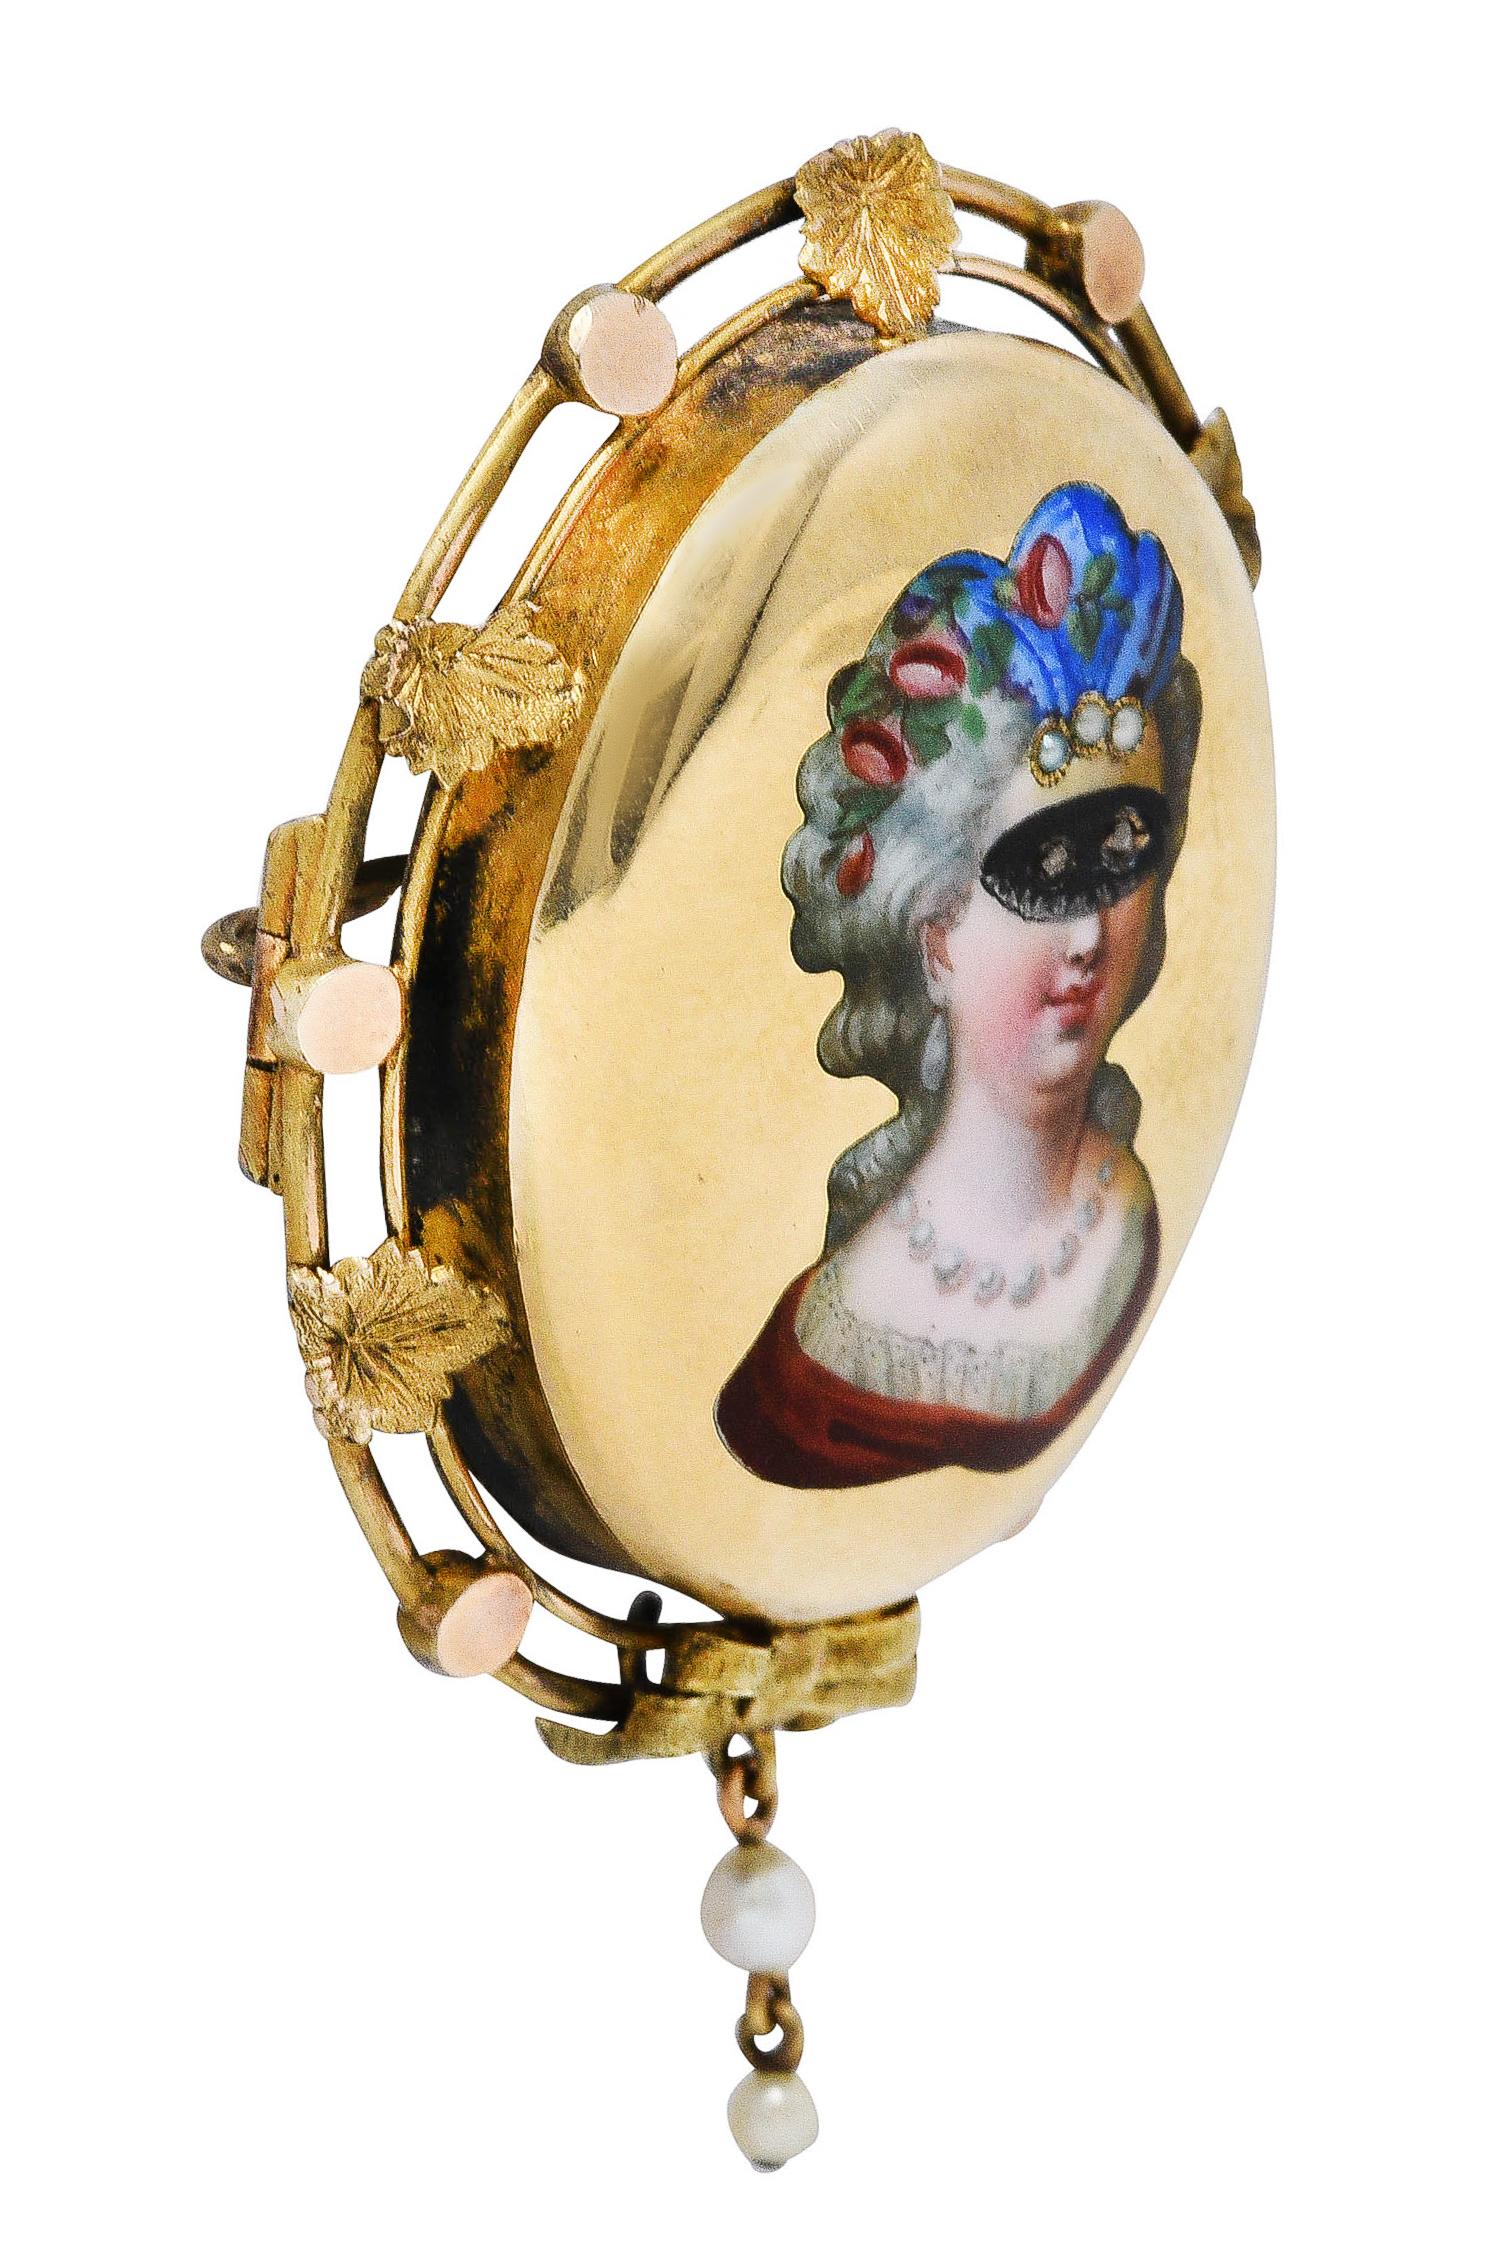 Designed as an oval domed brooch glossed with opaque enamel - exhibiting no loss

Depicting a colorful portrait of a coy Baroque woman adorned in a masquerade mask

Woman has a trio of seed pearls as a headband and rose cut diamonds as